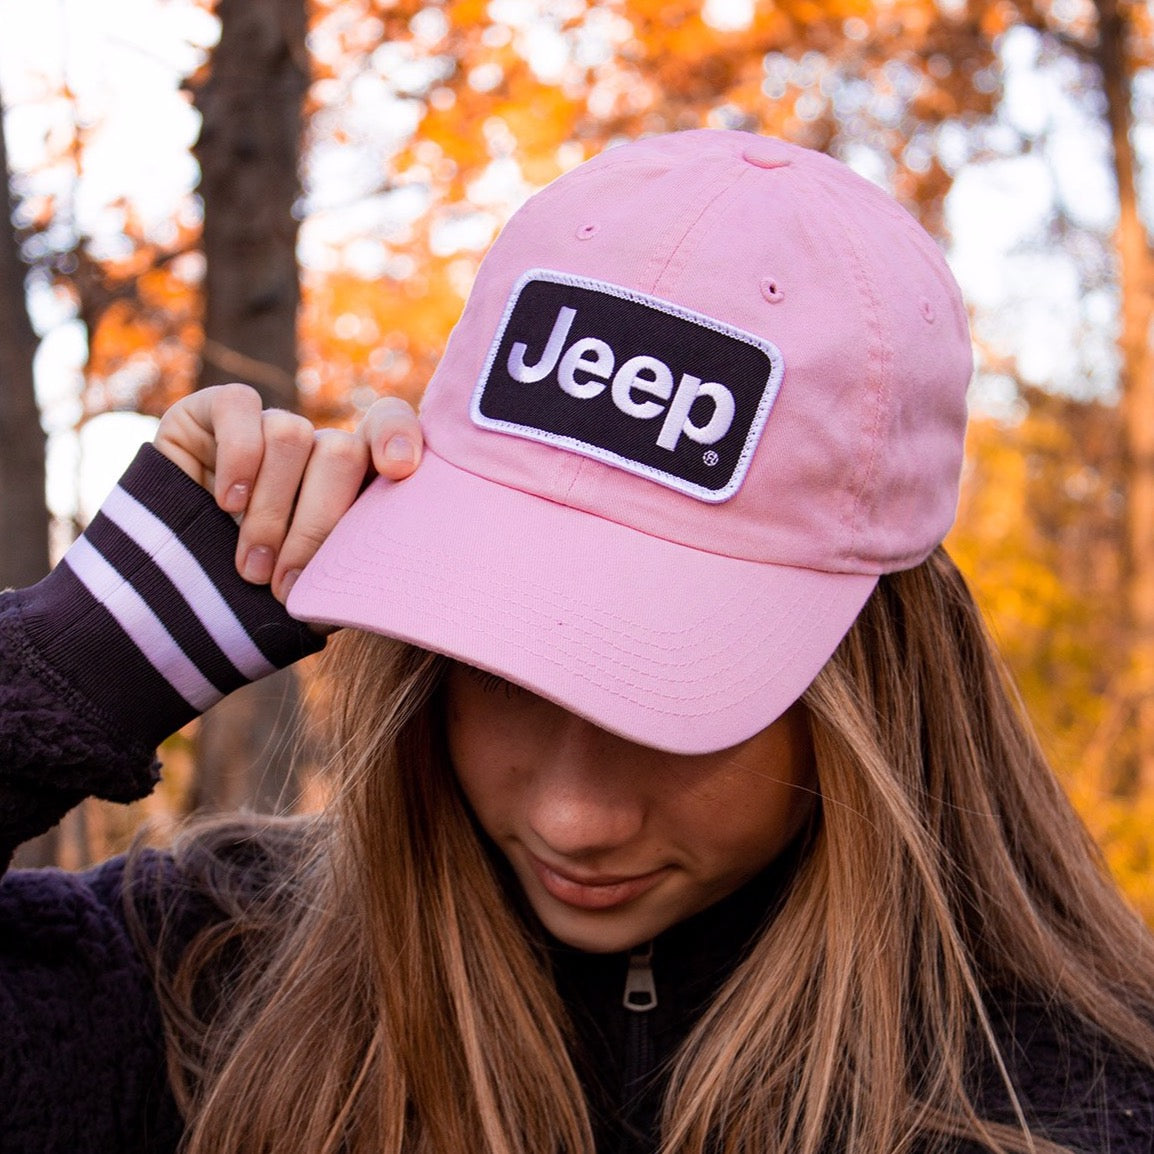 Hat - Jeep Chino Twill Patch - Pink